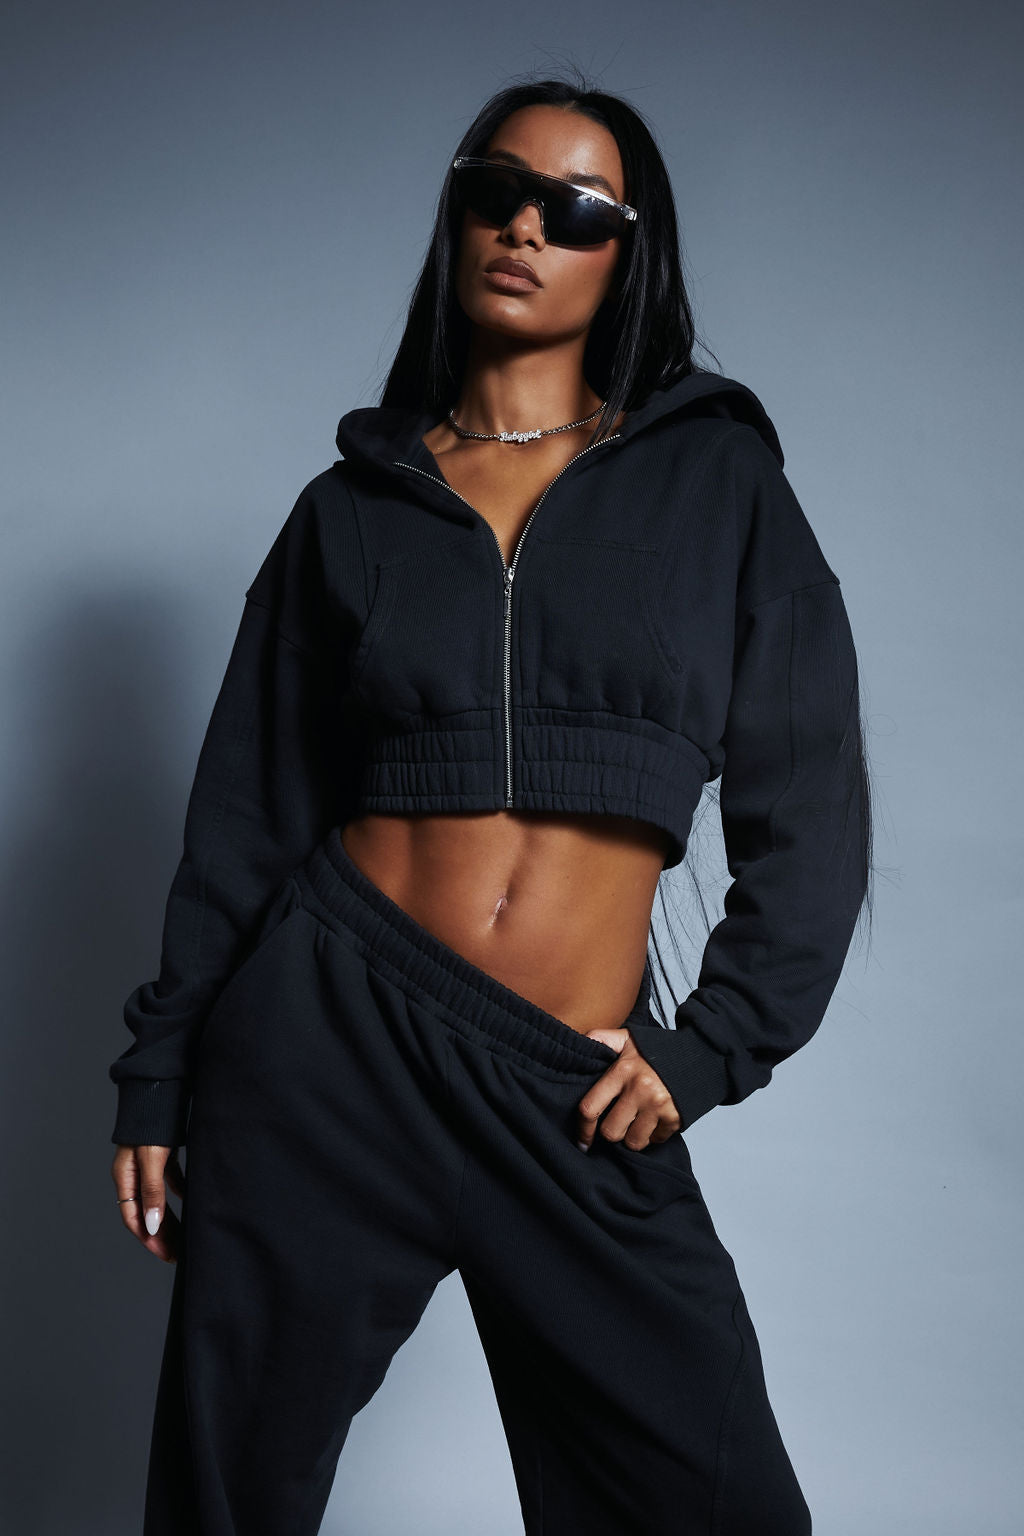 CROPPED HOODIE IN GRAPHITE